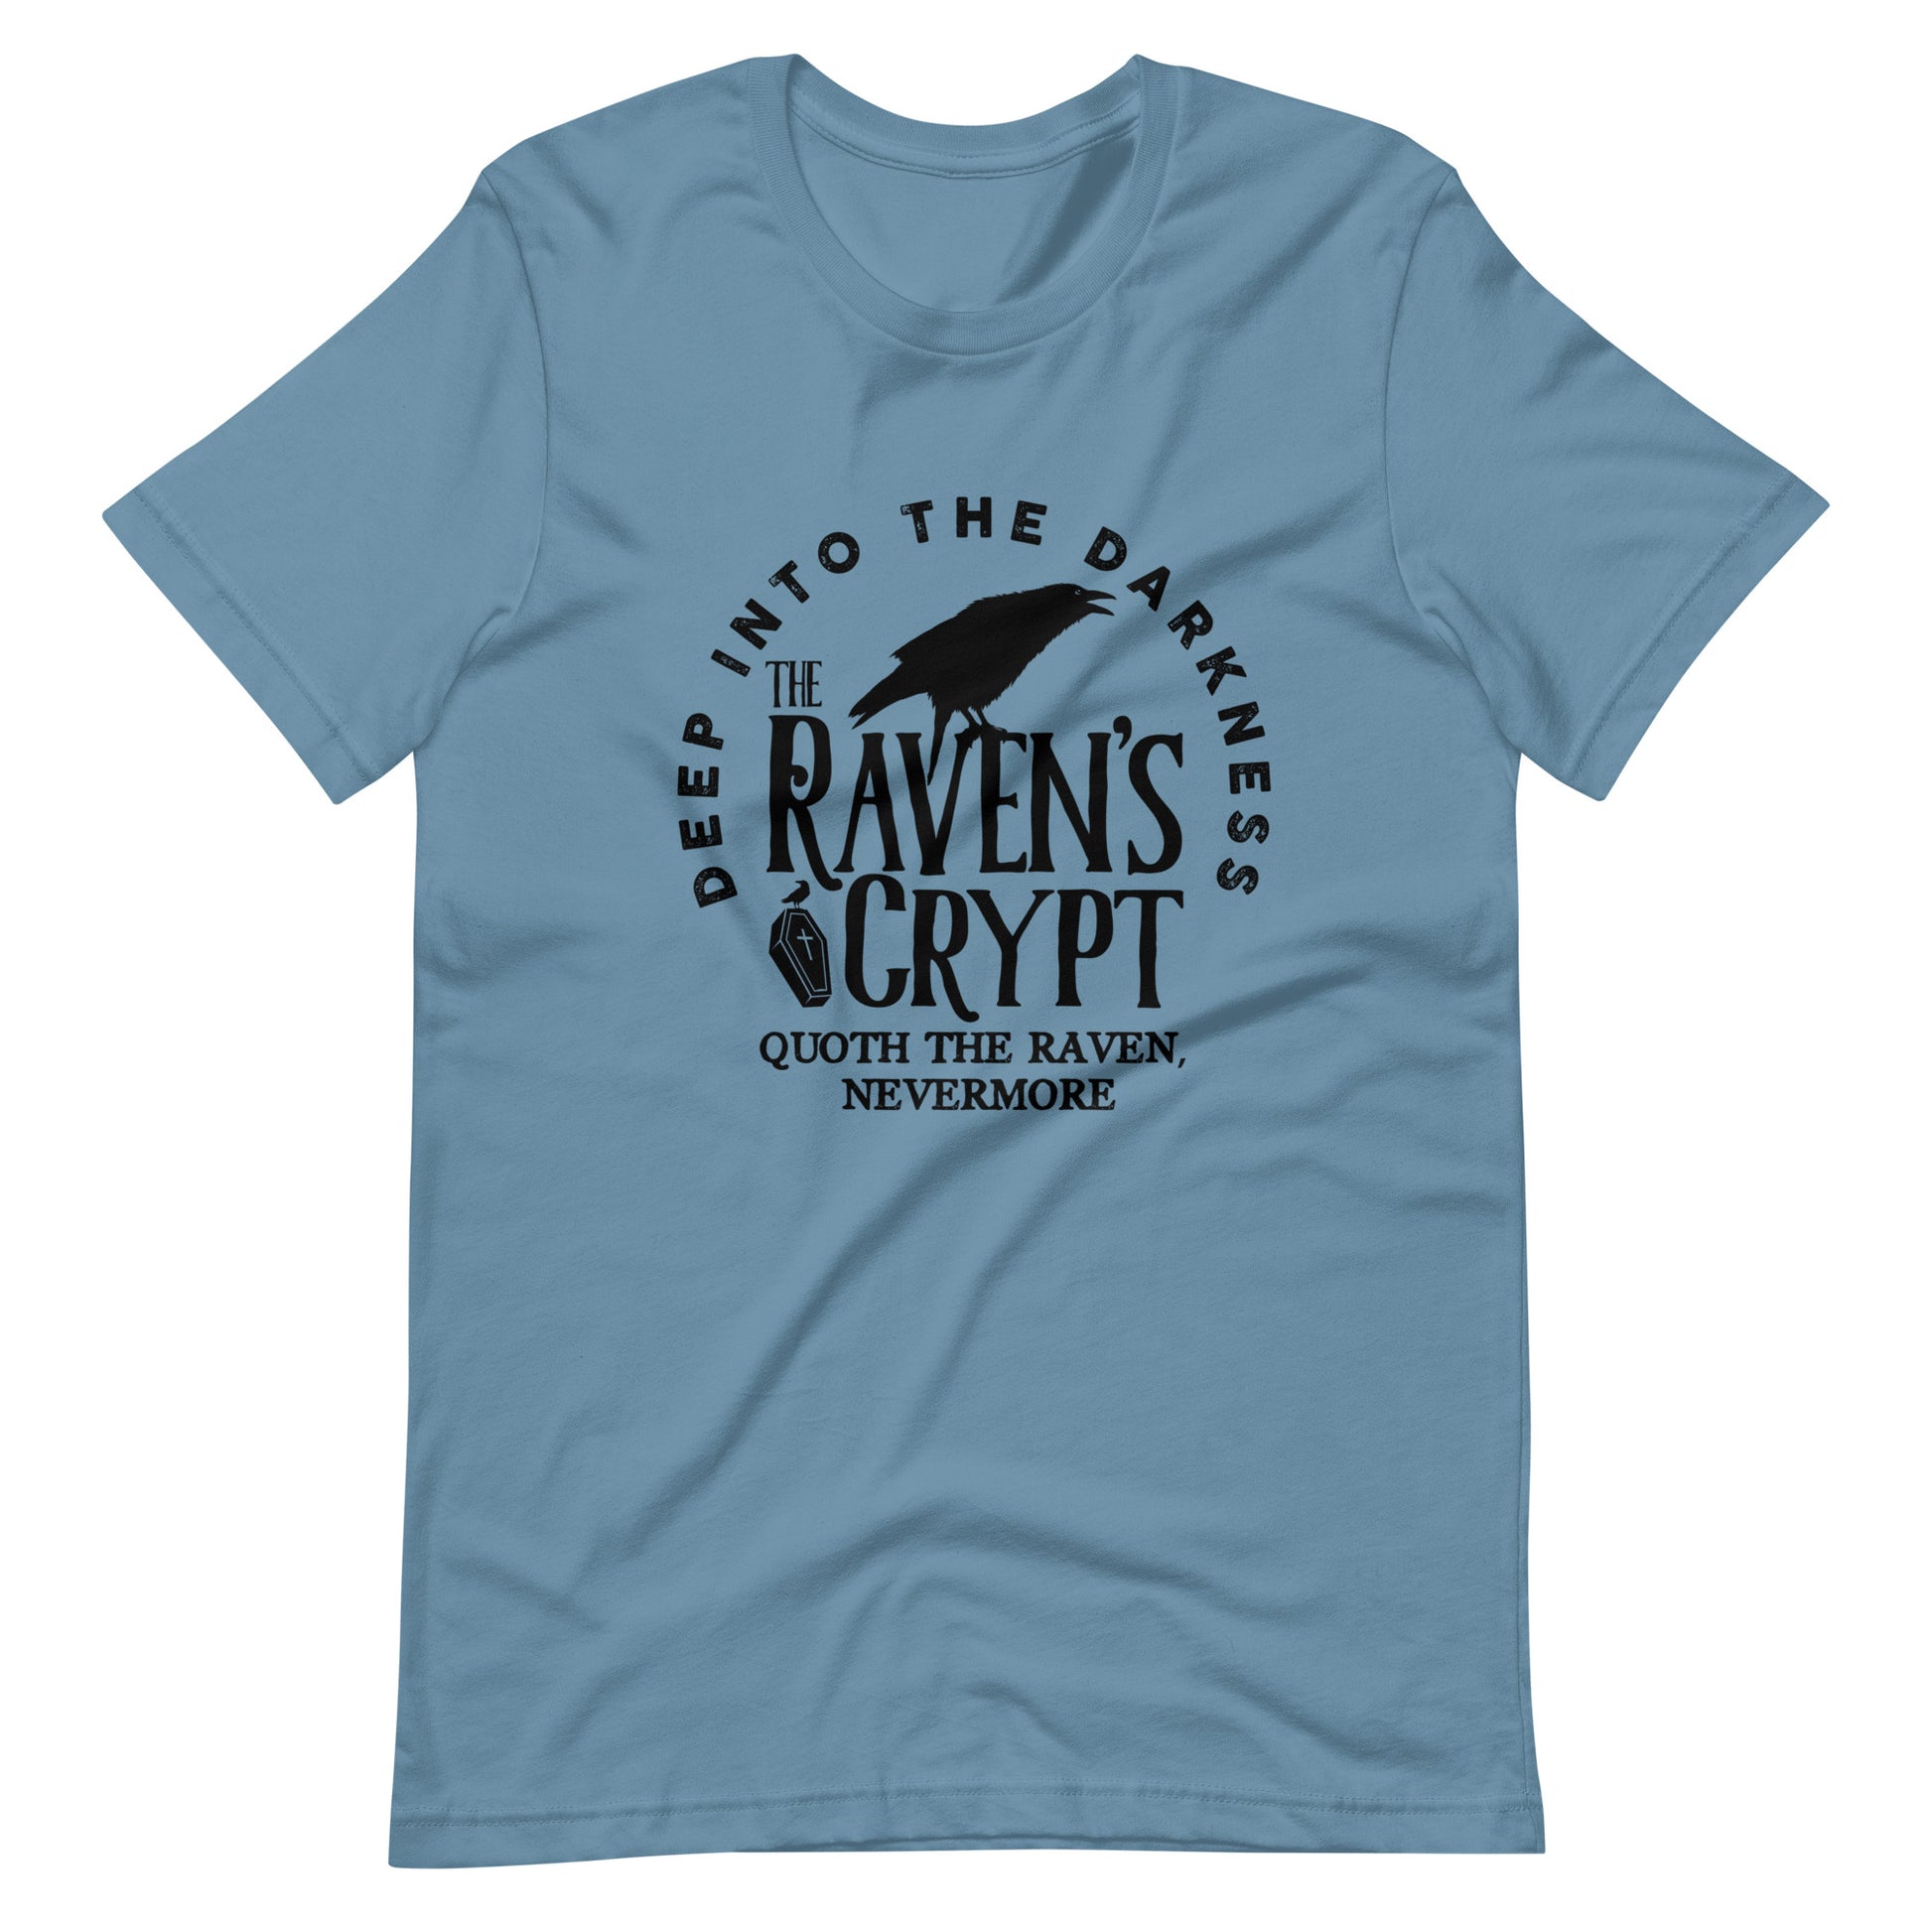 Deep Into the Darkness The Raven's Crypt - Men's t-shirt - Steel Blue Front